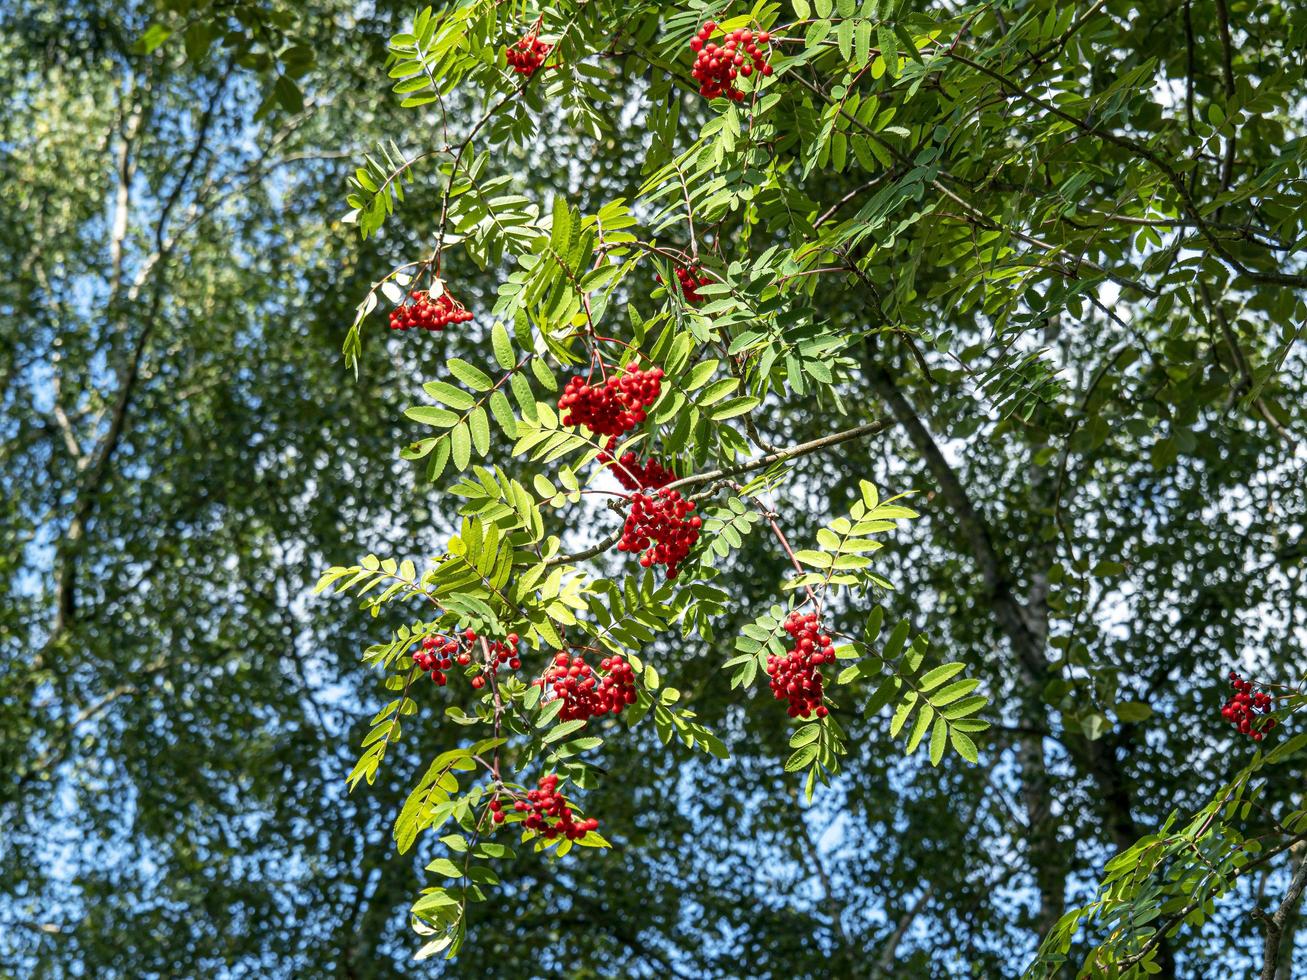 Looking up at rowan berries and leaves in a wood photo